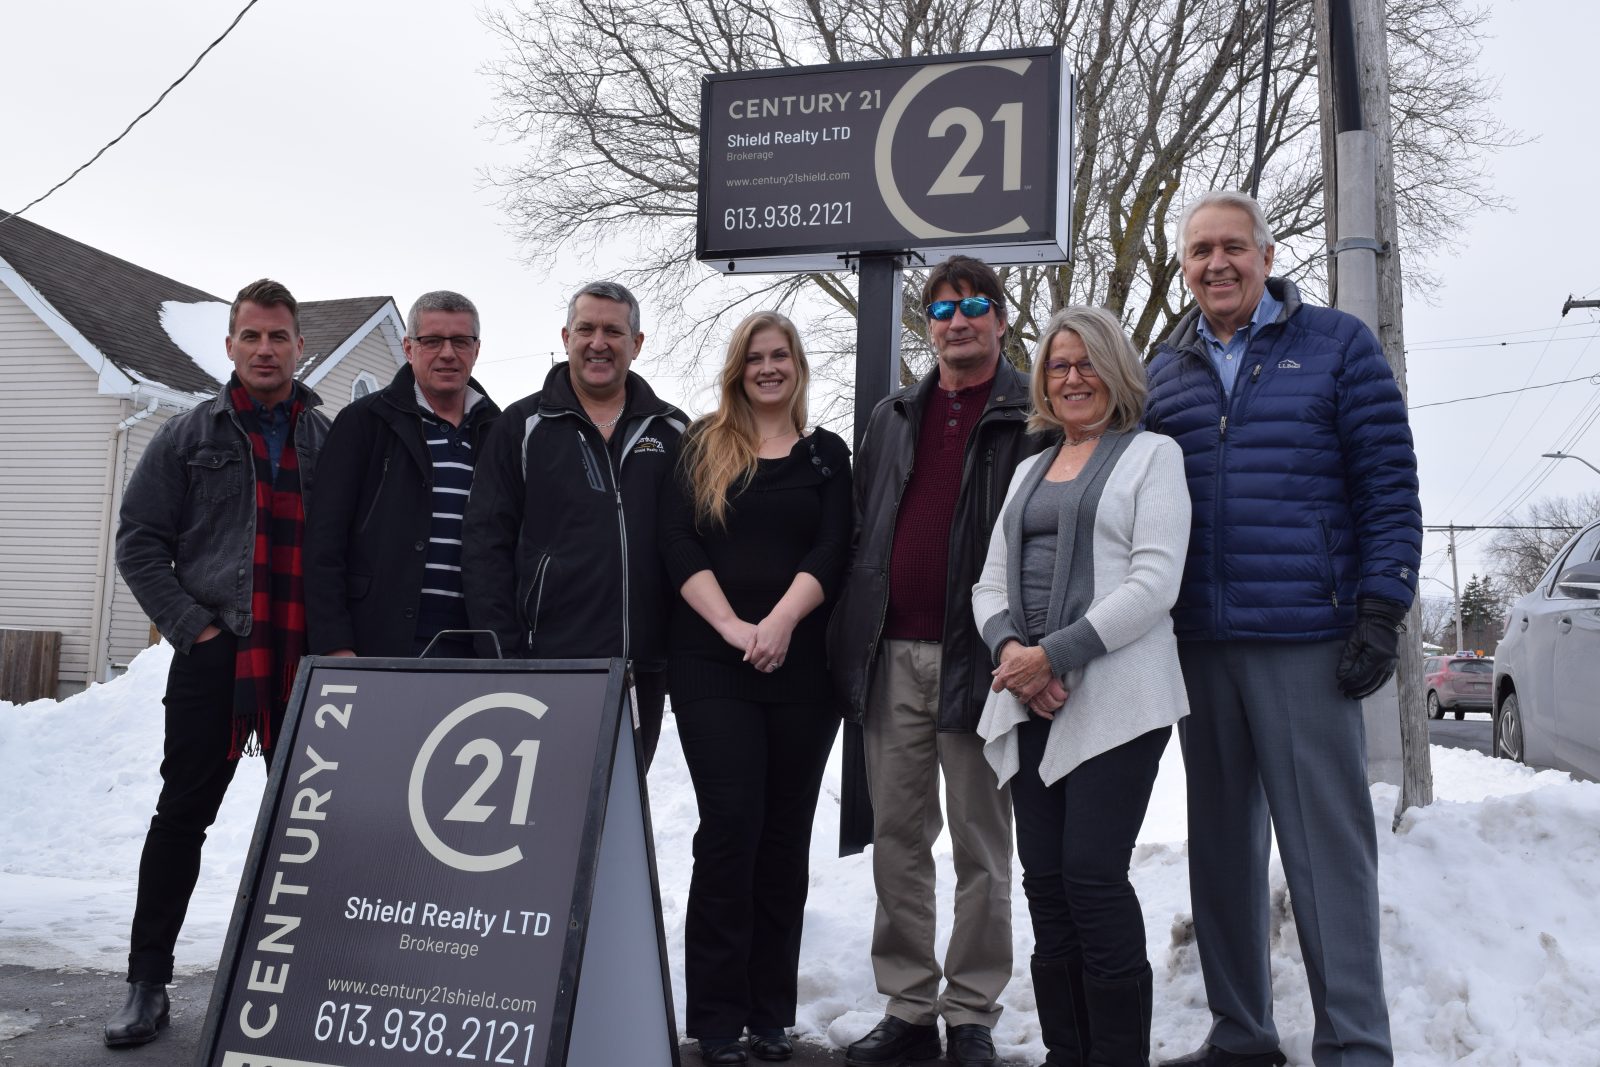 Lancaster gets gold as Century 21 expands